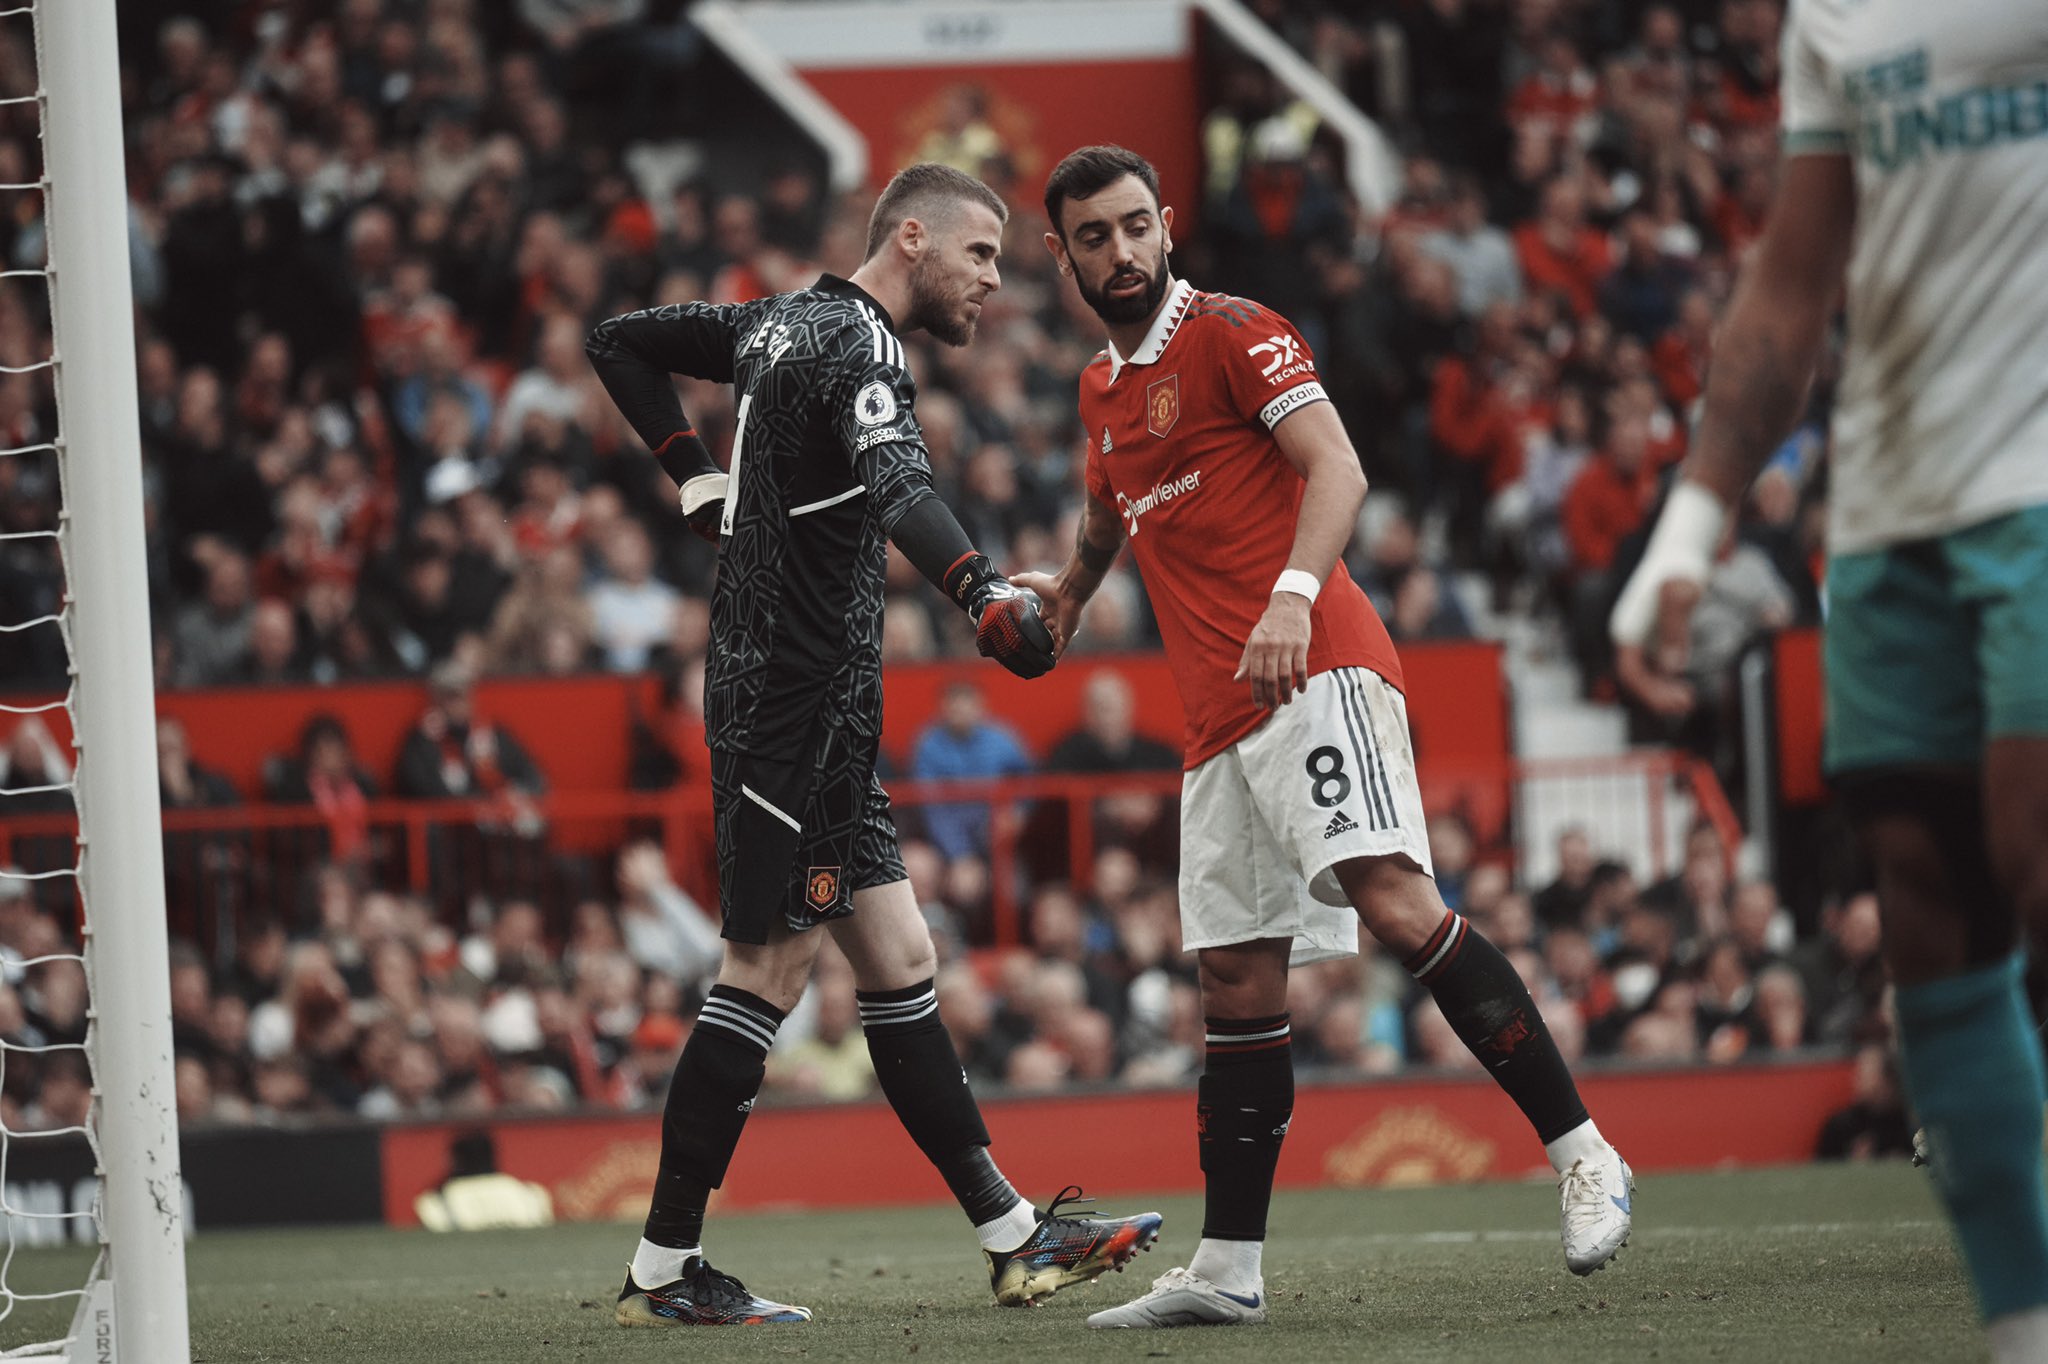 Man United vs Tottenham LIVE – Manchester United AIM to CLOSE in on Tottenham Hotspur at Old Trafford - Check Manchester United vs Tottenham Hotspur Predicted XI, Team News – Follow LIVE